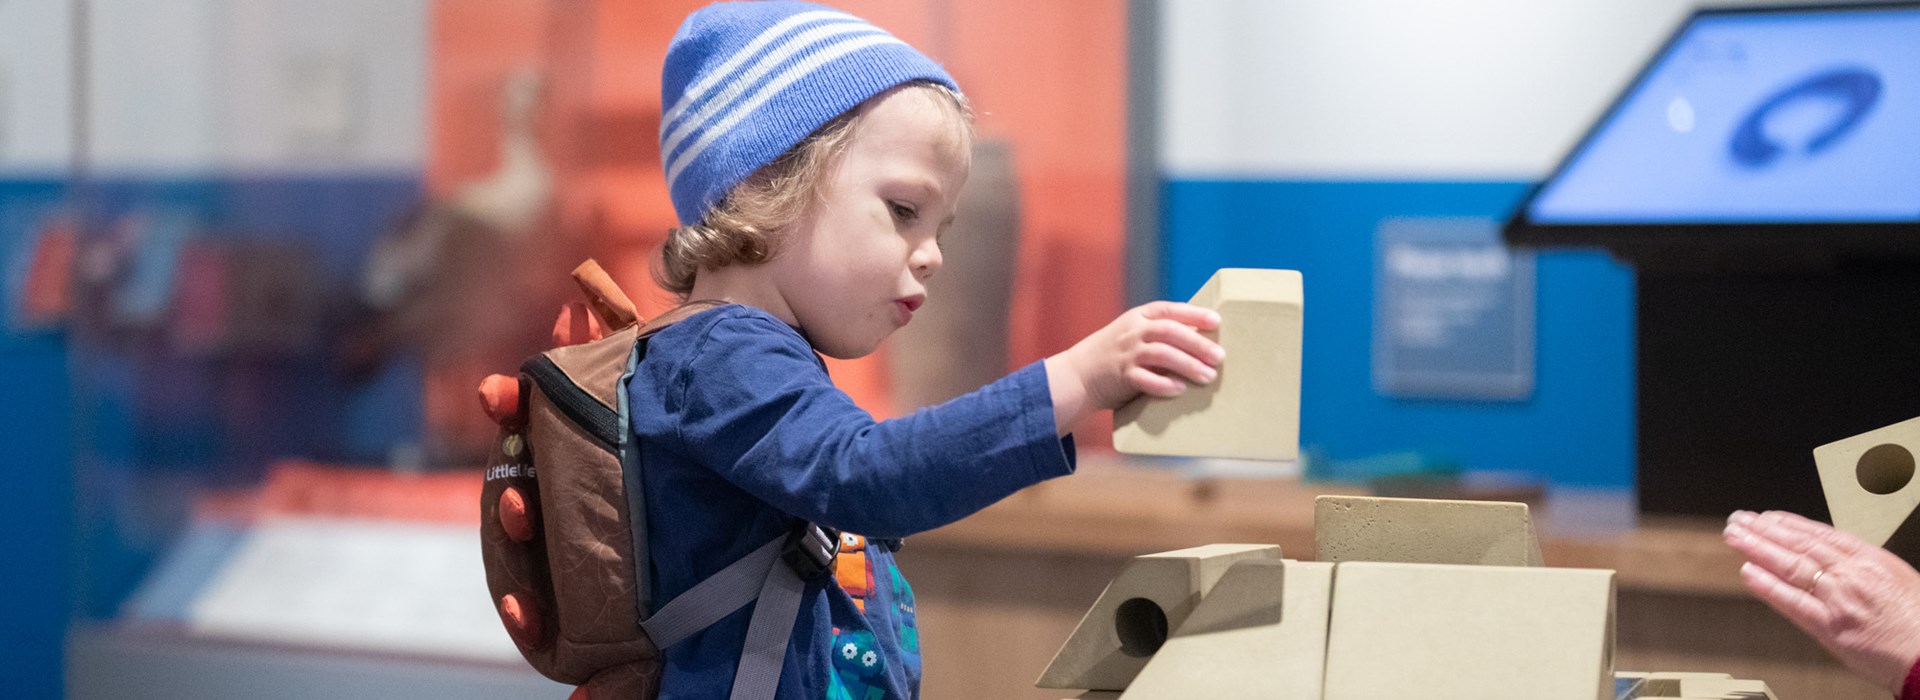 A child holding a white building brick in a museum gallery 